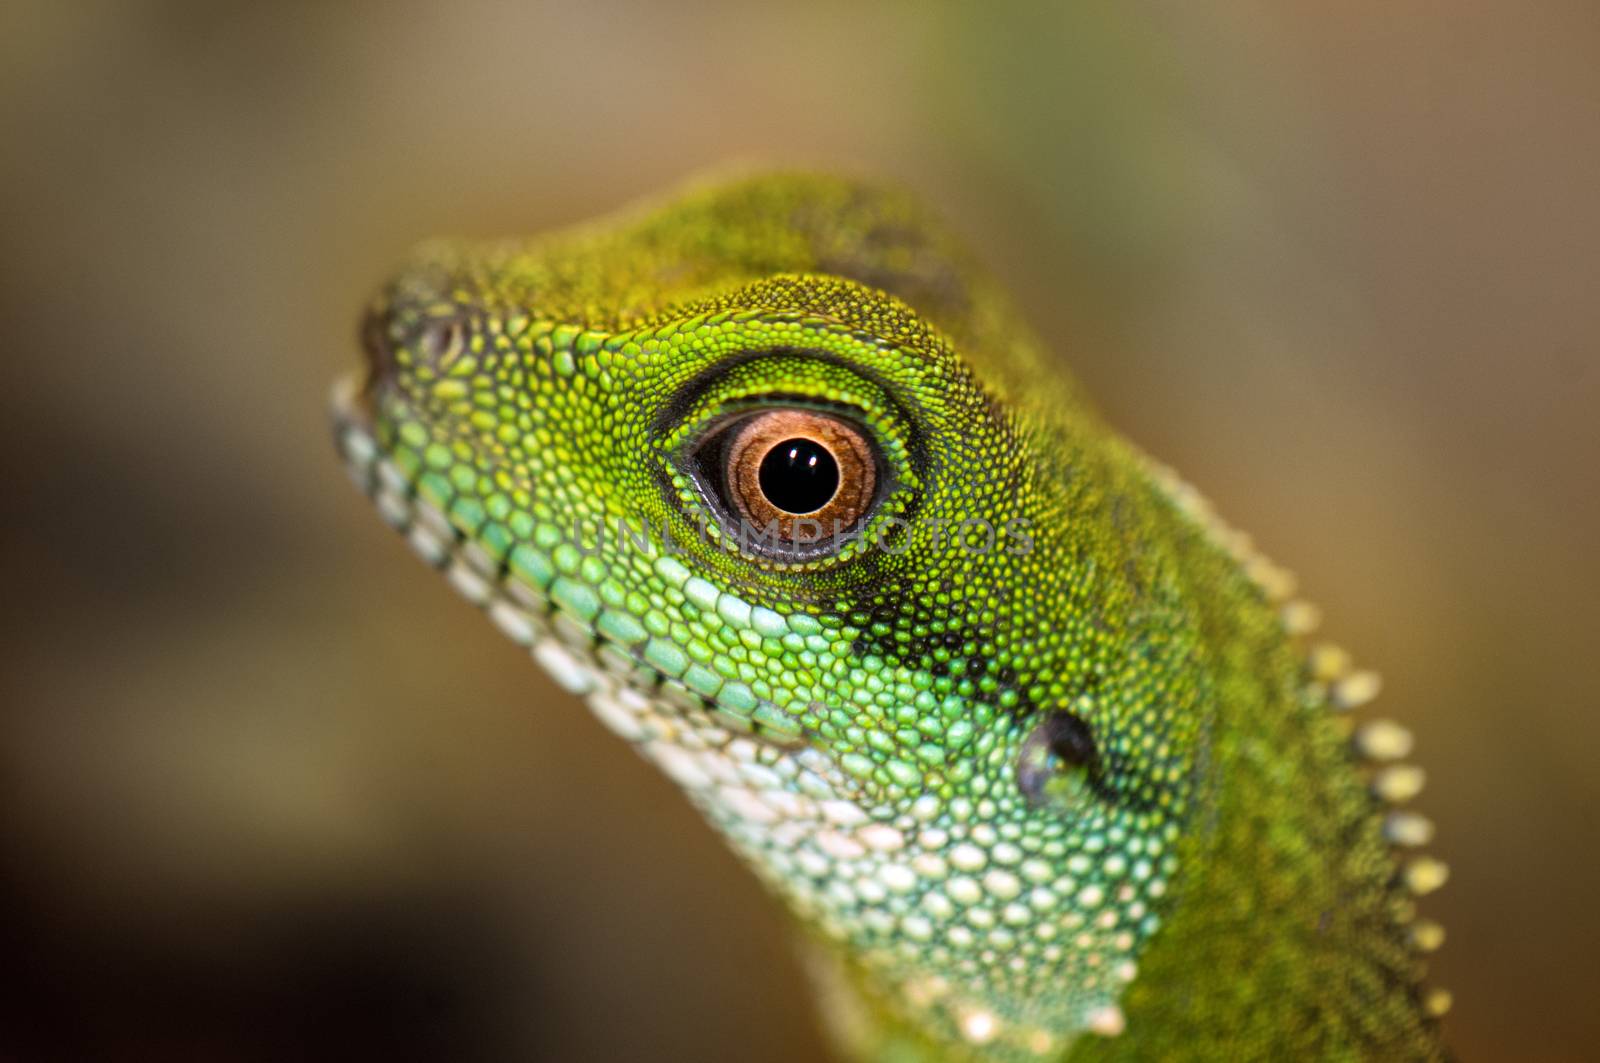 Close up detail of a green water dragon eye